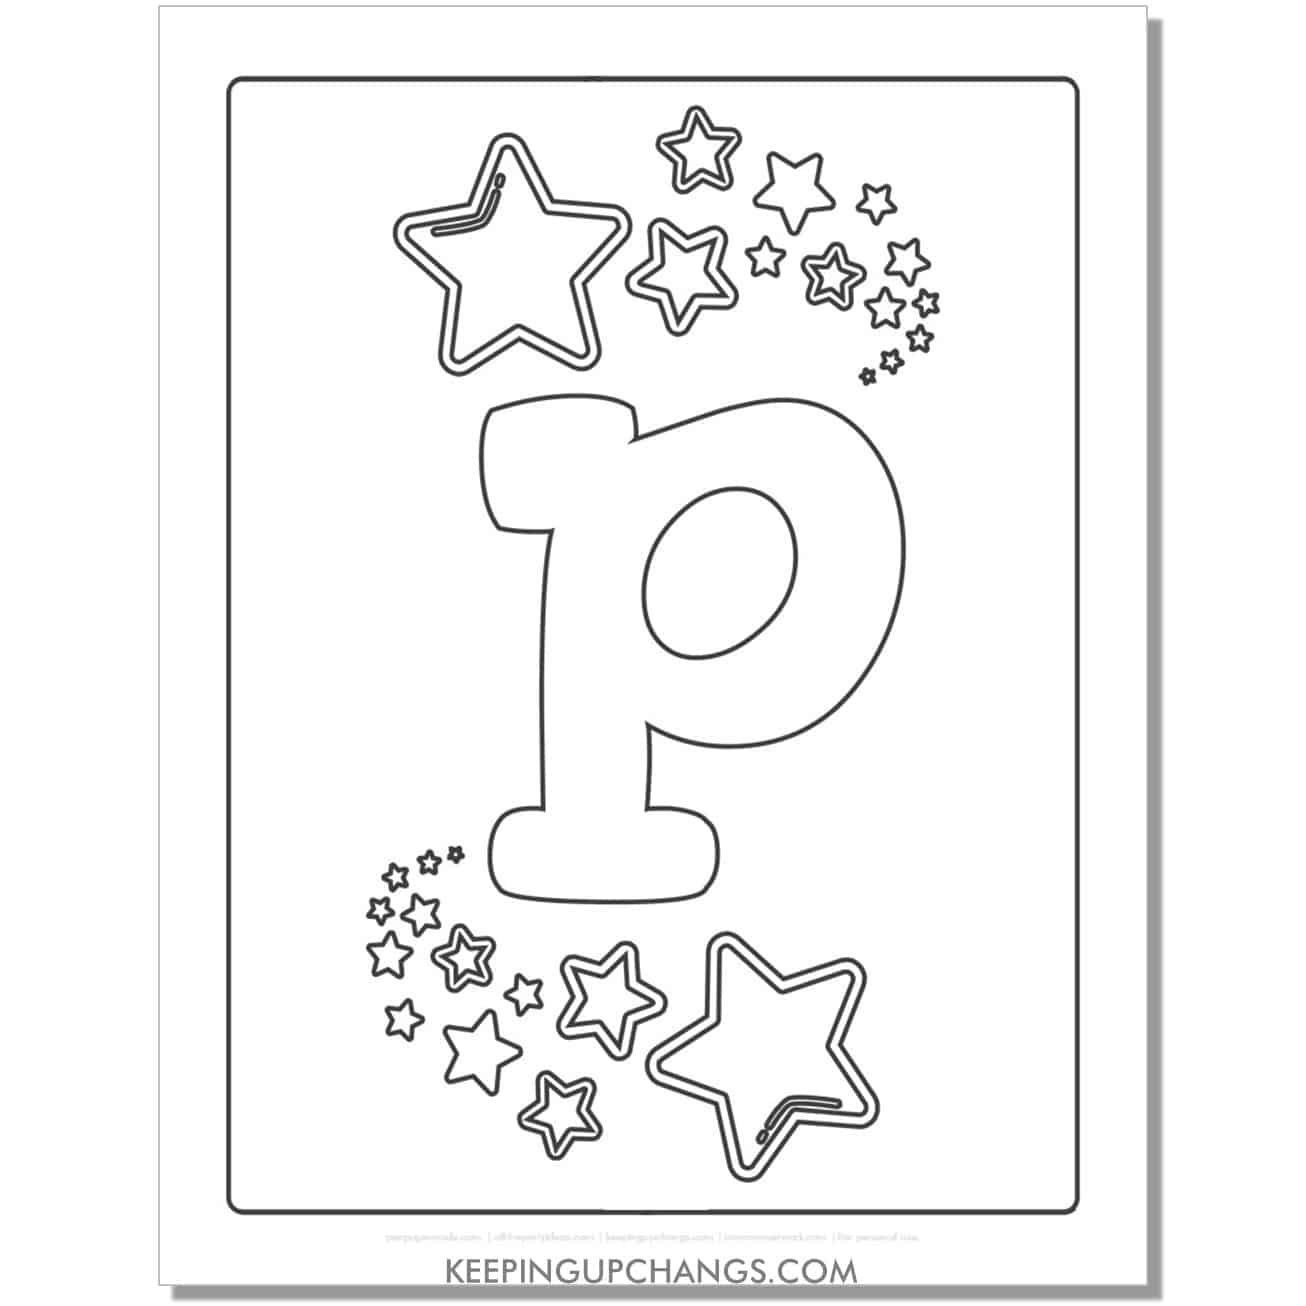 cool letter p to color with stars, space theme.